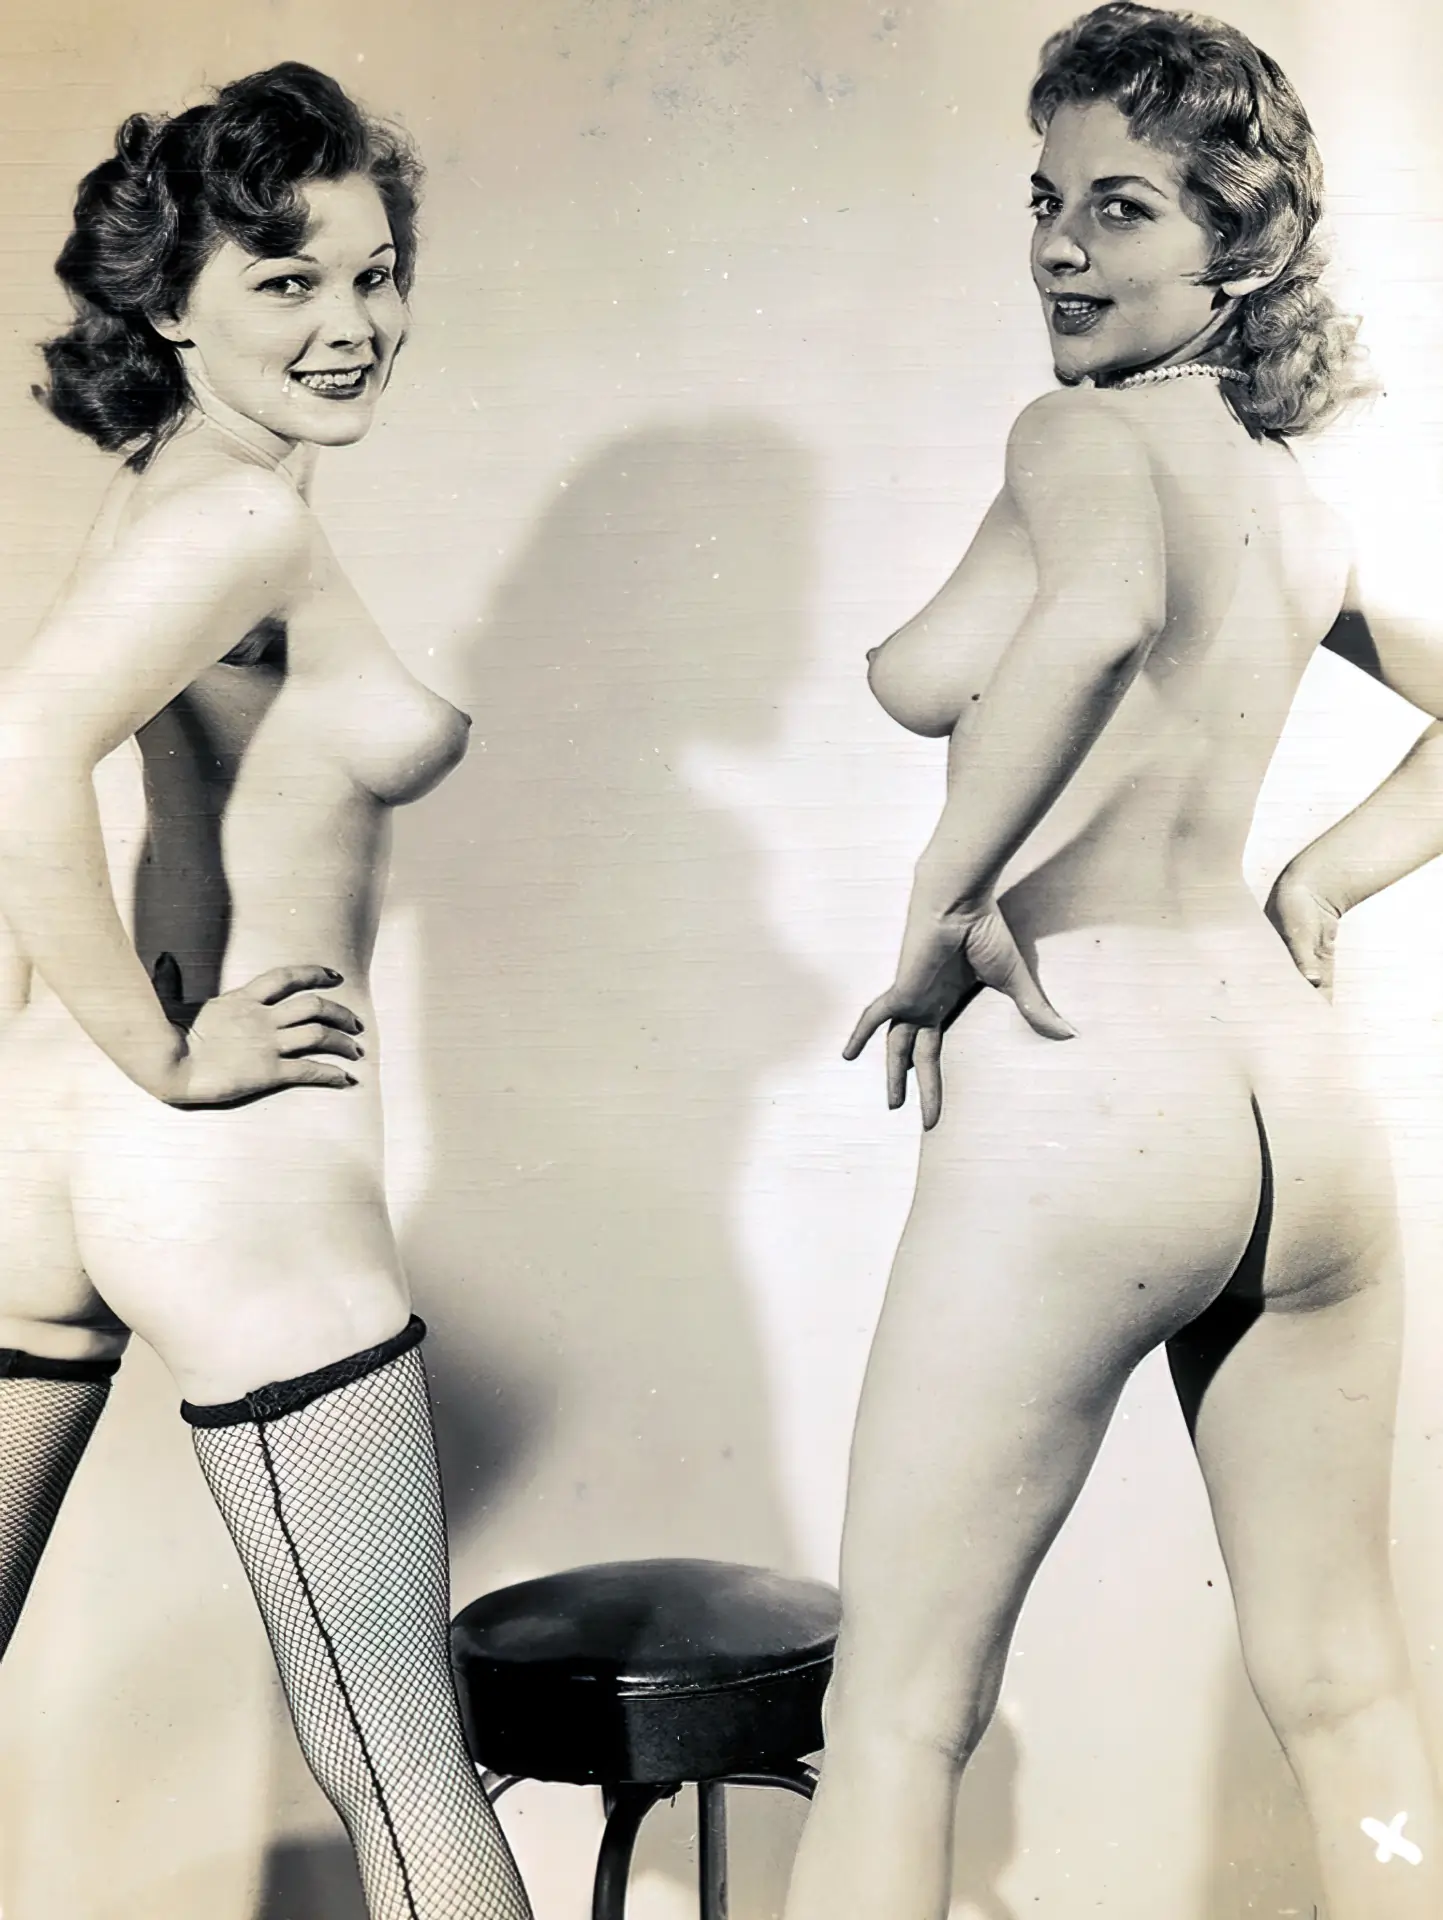 Two glamorous looking vintage chicks show off their bare asses